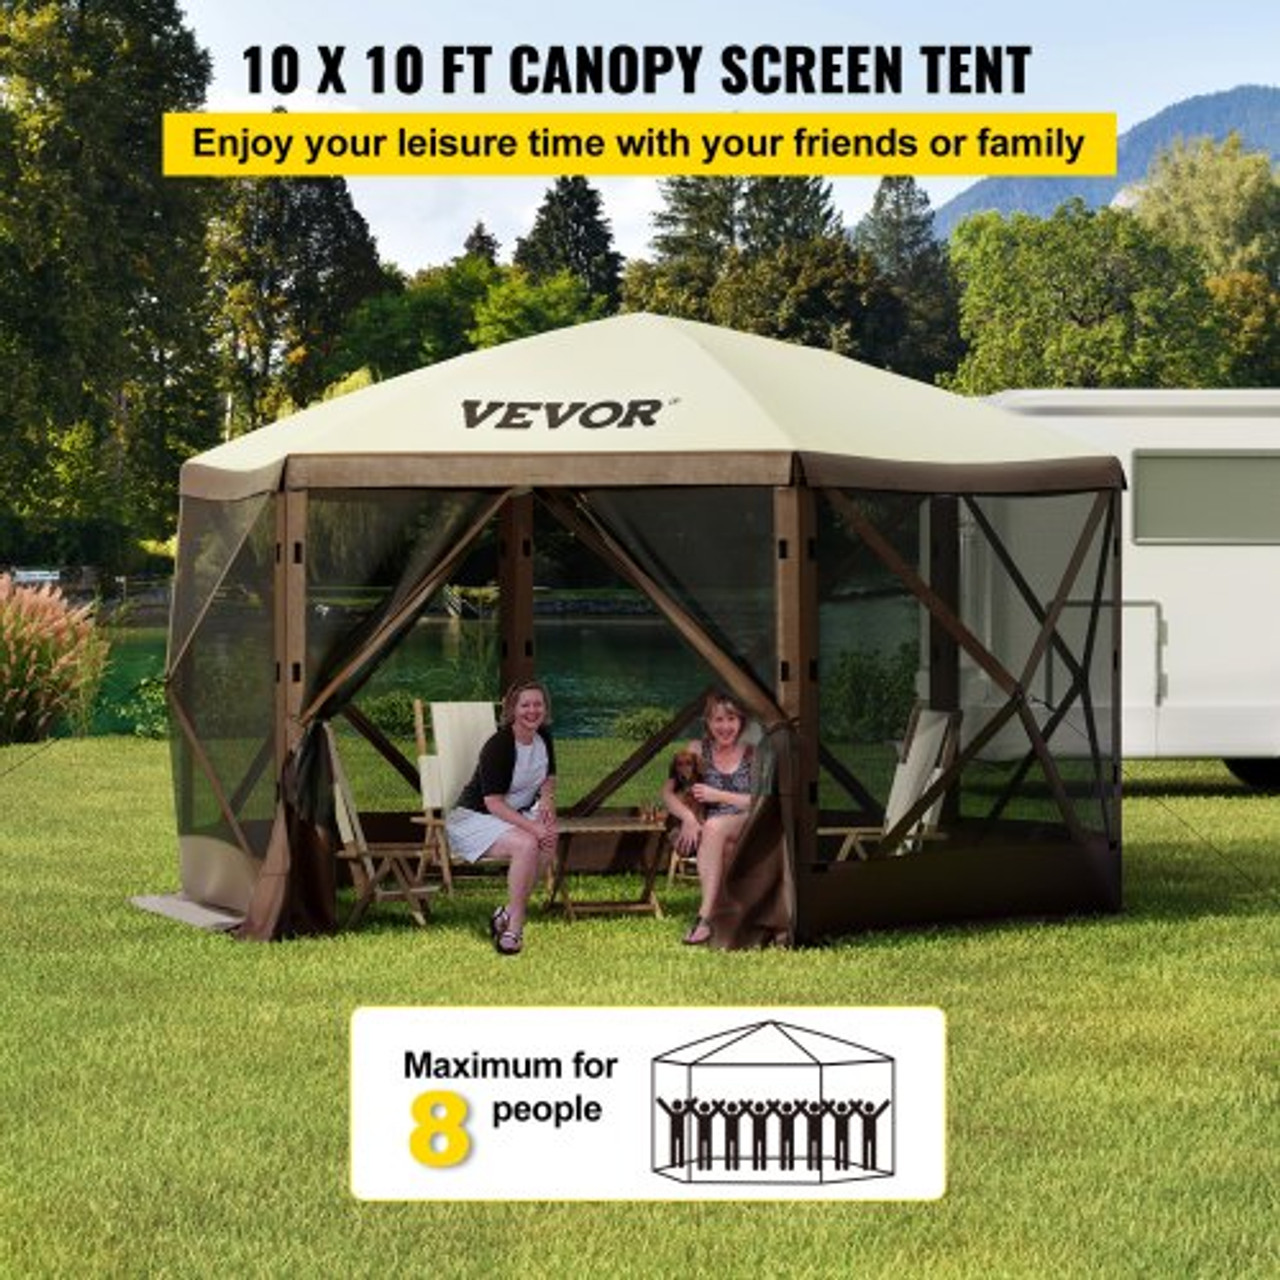 Camping Gazebo Tent, 10'x10', 6 Sided Pop-up Canopy Screen Tent for 8 Person Camping, Waterproof Screen Shelter w/Portable Storage Bag, Ground Stakes, Mesh Windows, Brown & Beige